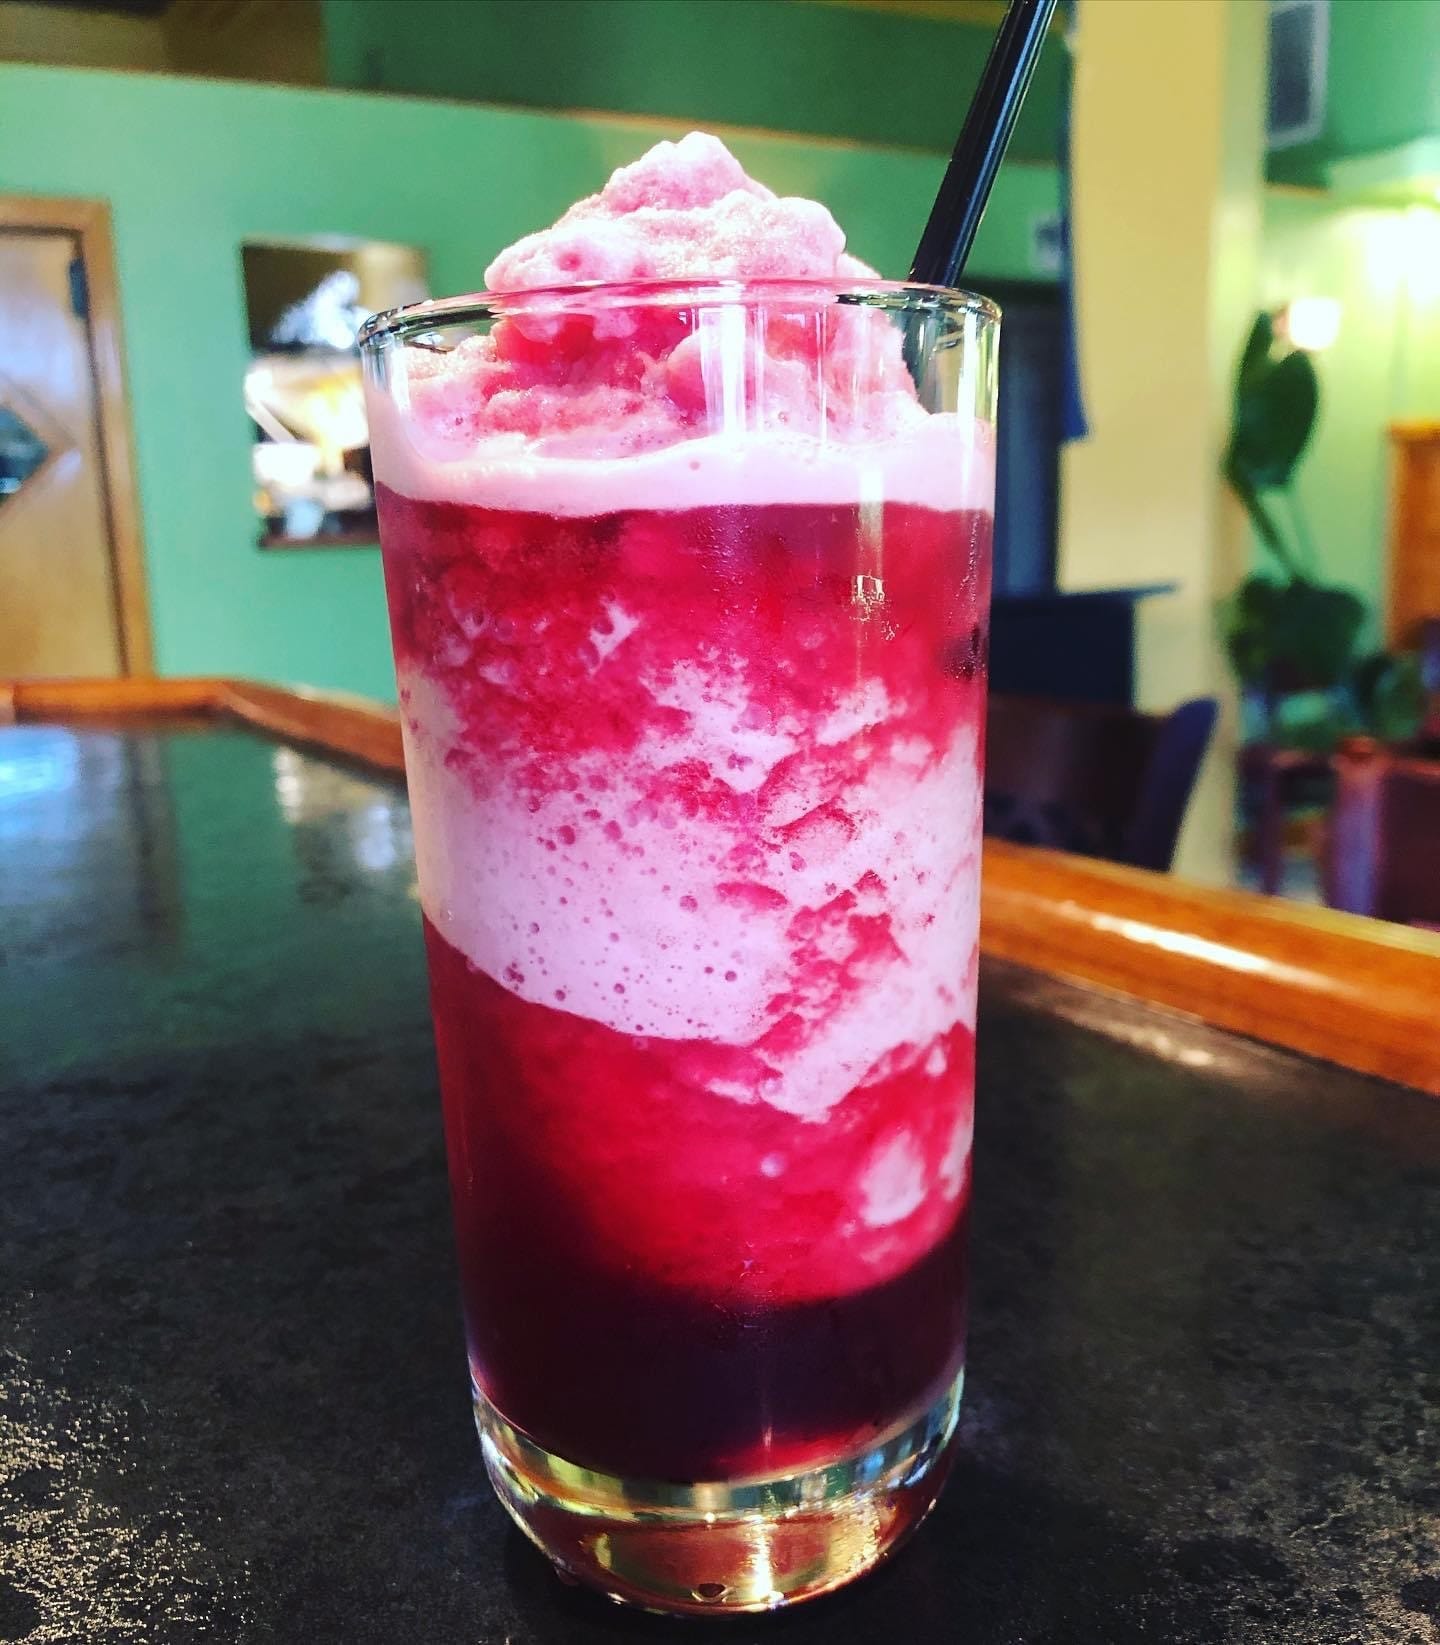 A bright red Sorrel drink is a Christmas tradition in the Caribbean; this is the version served at Caribbean Heritage Restaurant in Rochester.